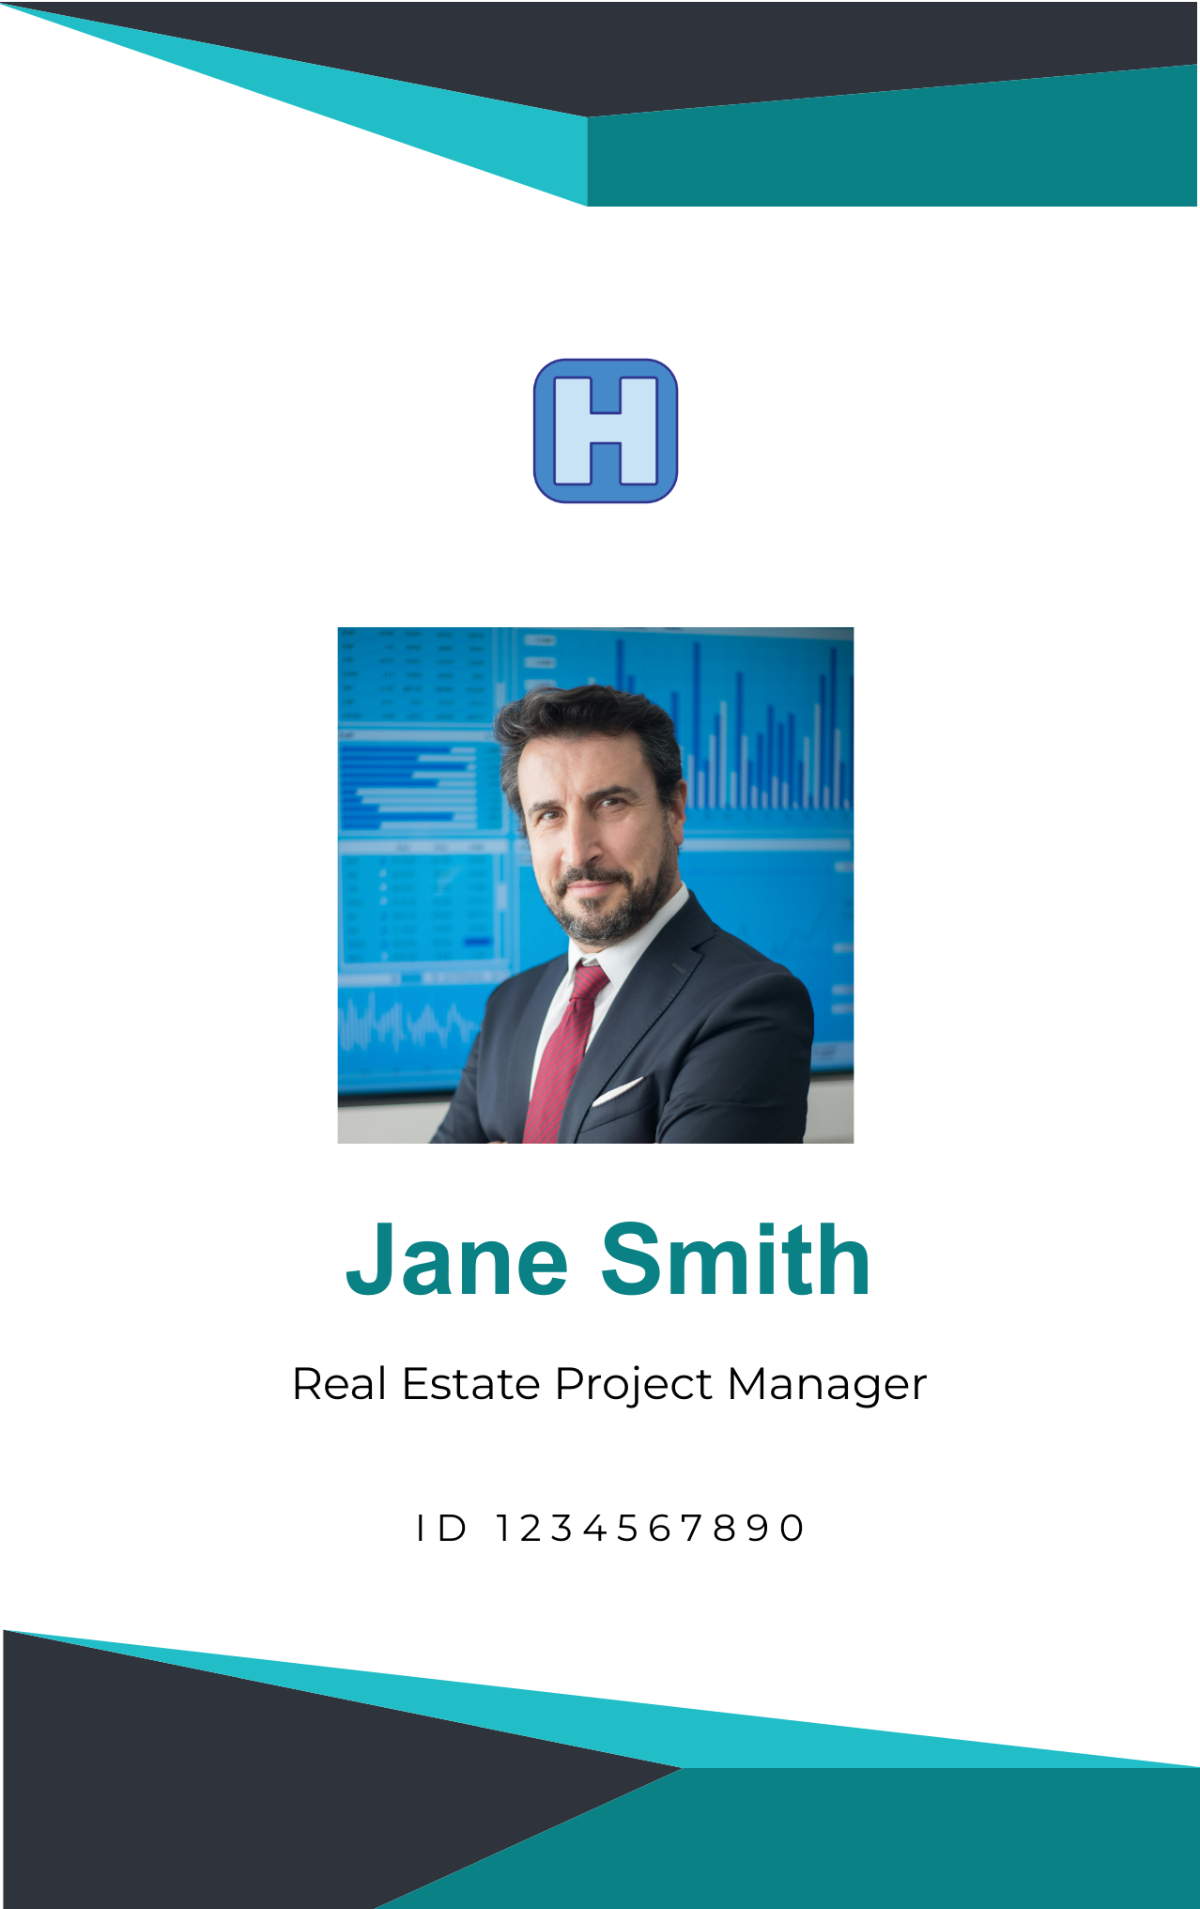 Real Estate Project Manager ID Card